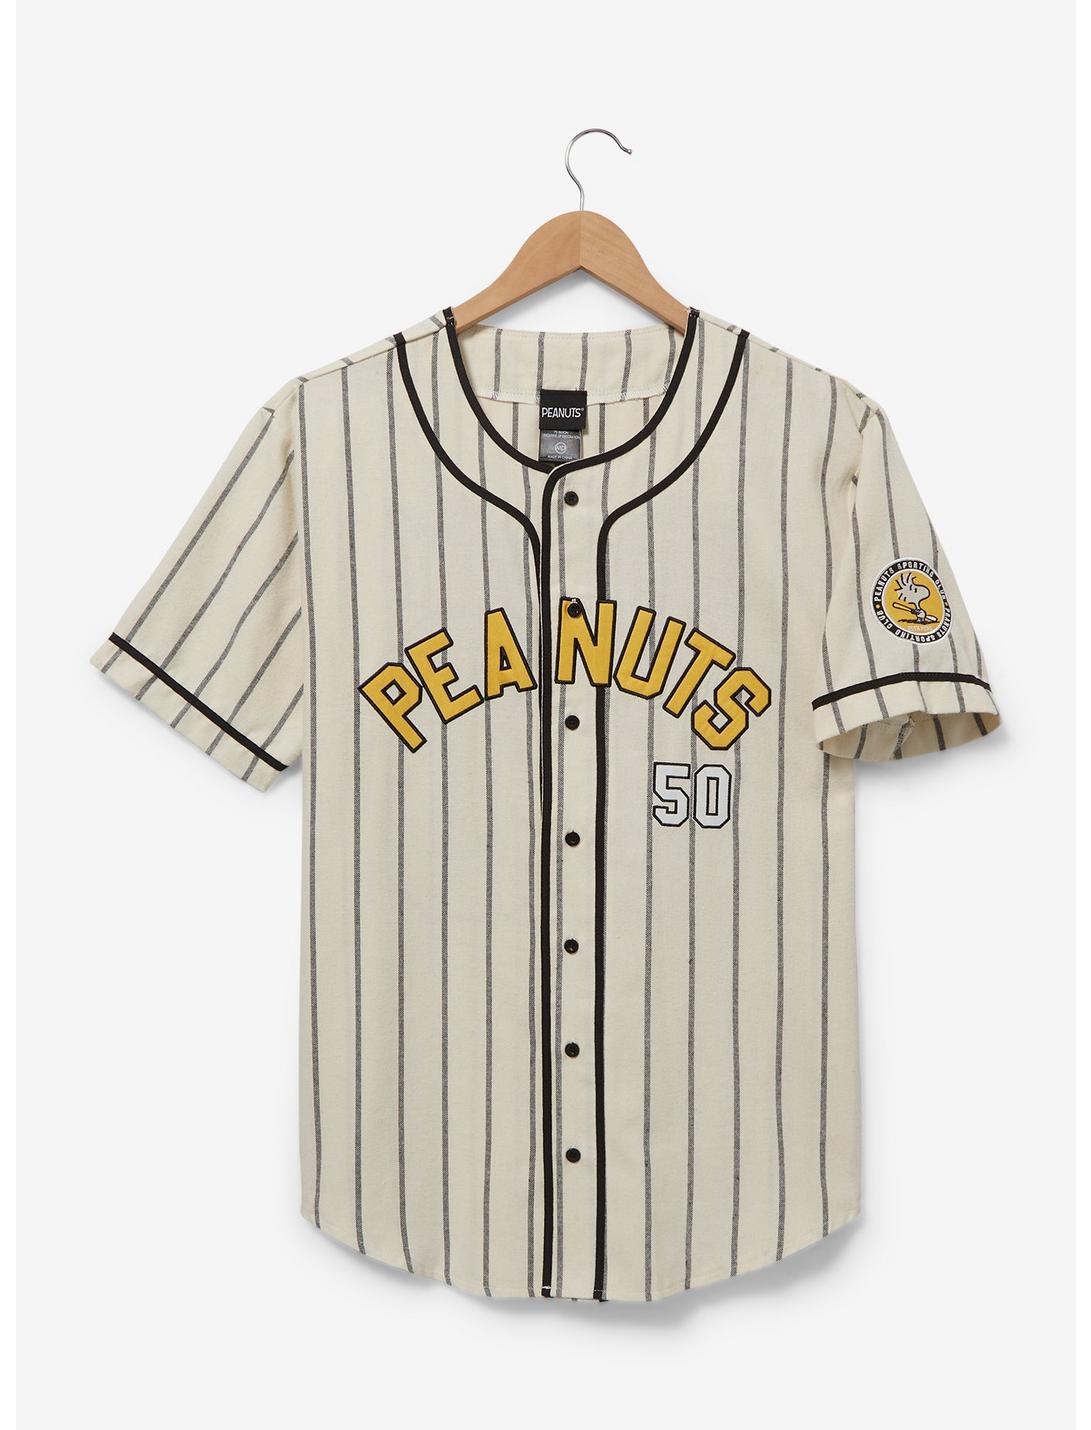 Peanuts Snoopy and Woodstock Striped Baseball Jersey, OFF WHITE, hi-res